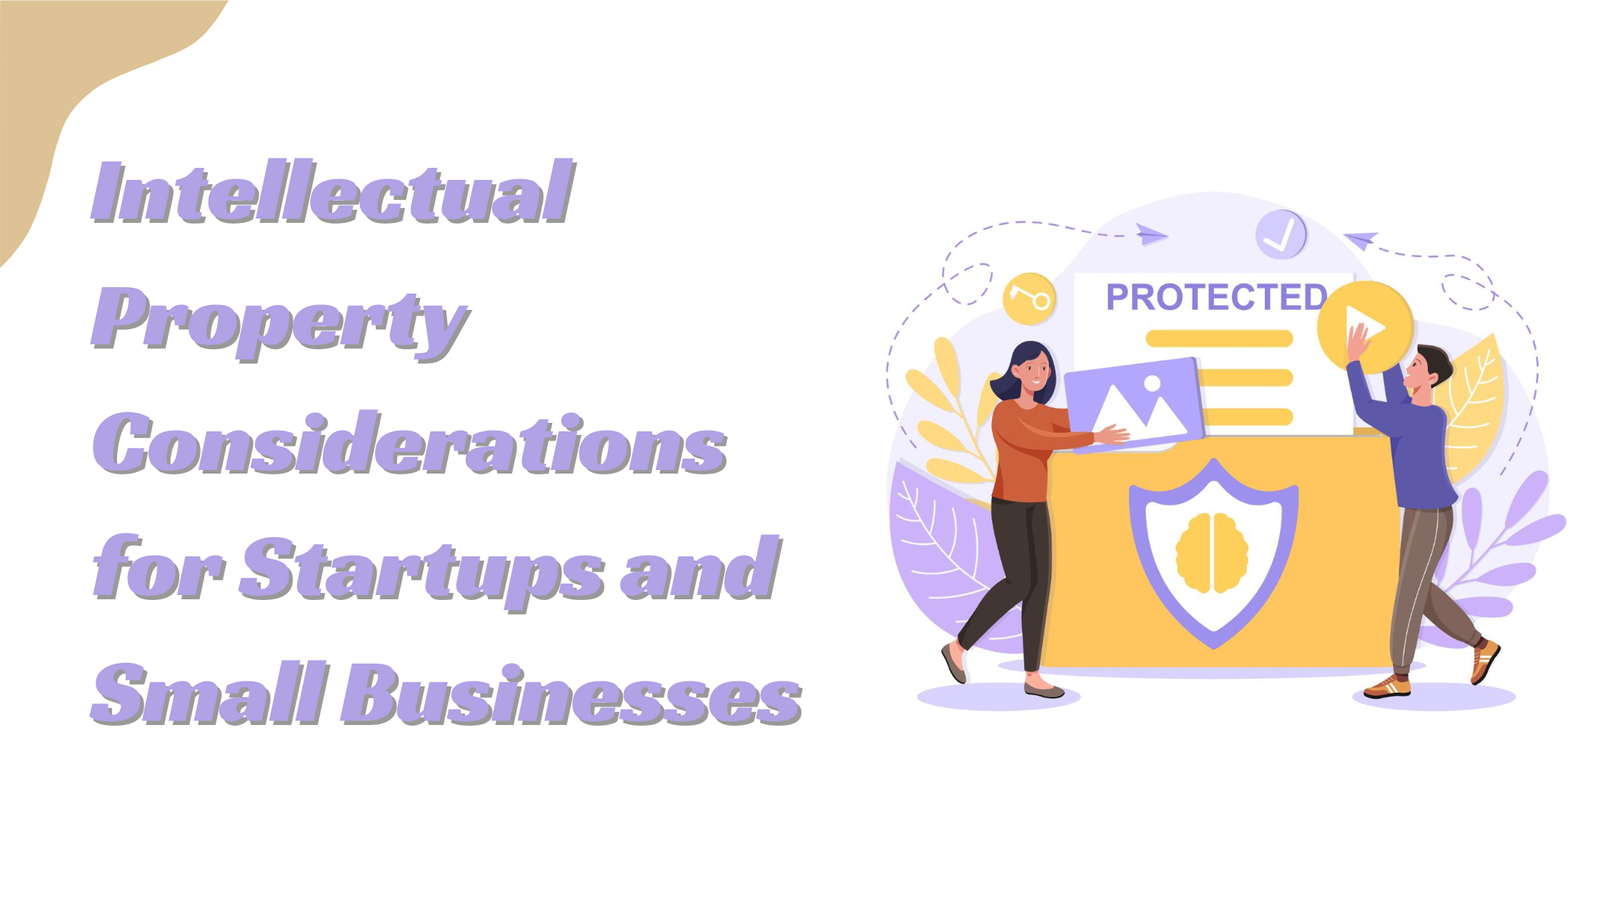 Intellectual Property Considerations for Startups and Small Businesses